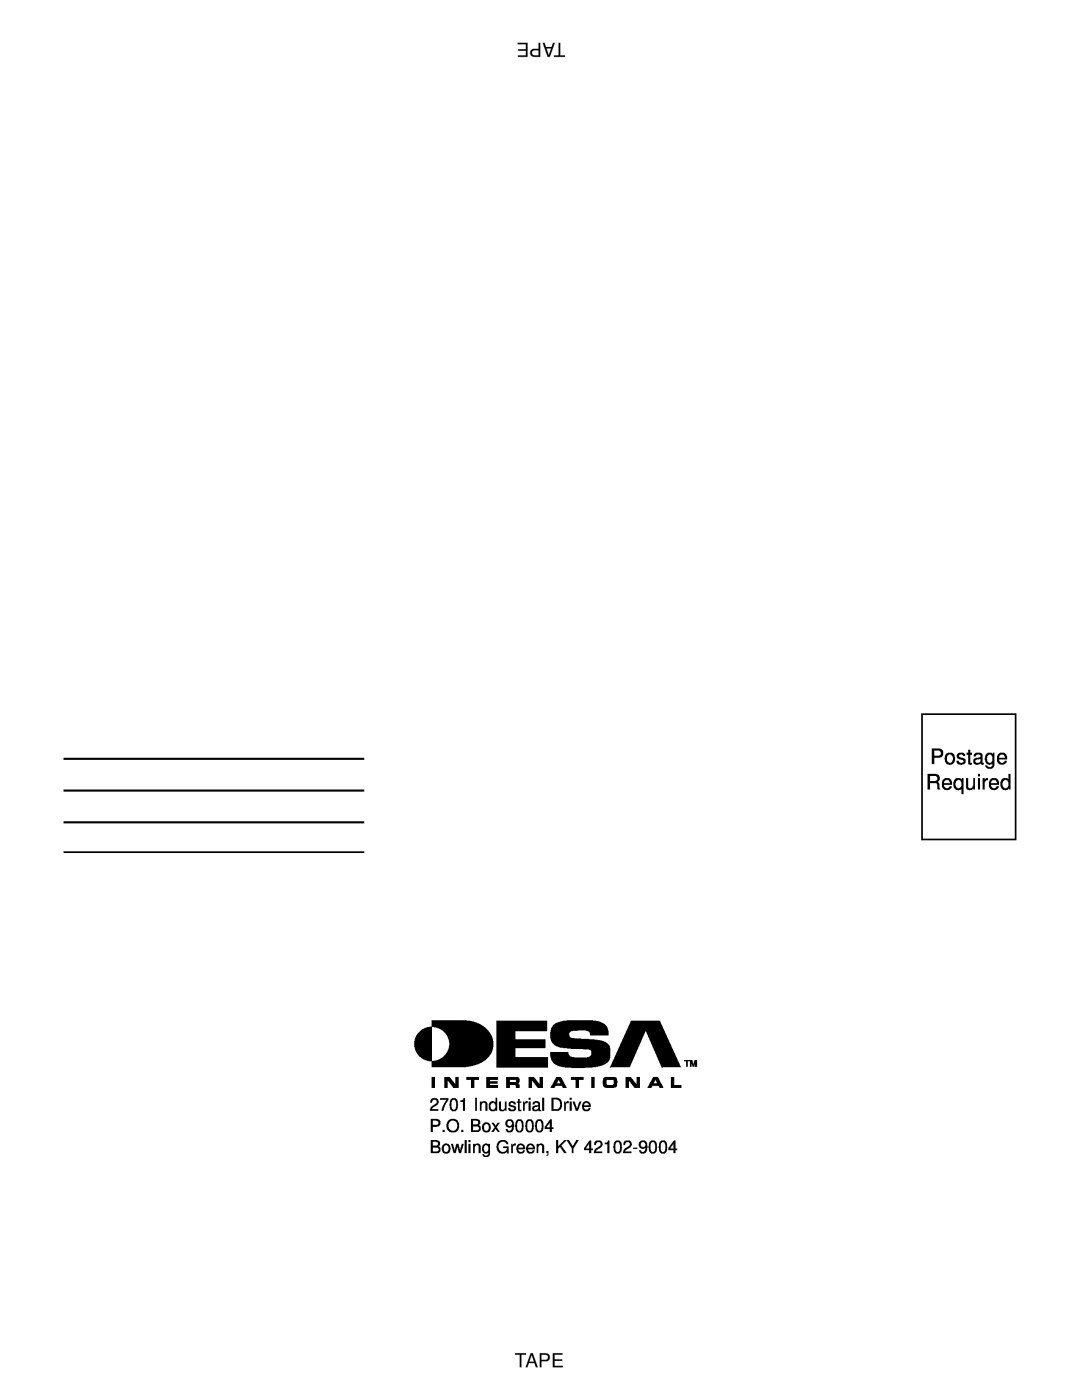 Desa VP10A, VP1000BTA VN10A installation manual Tape, Postage Required, Industrial Drive P.O. Box Bowling Green, KY 